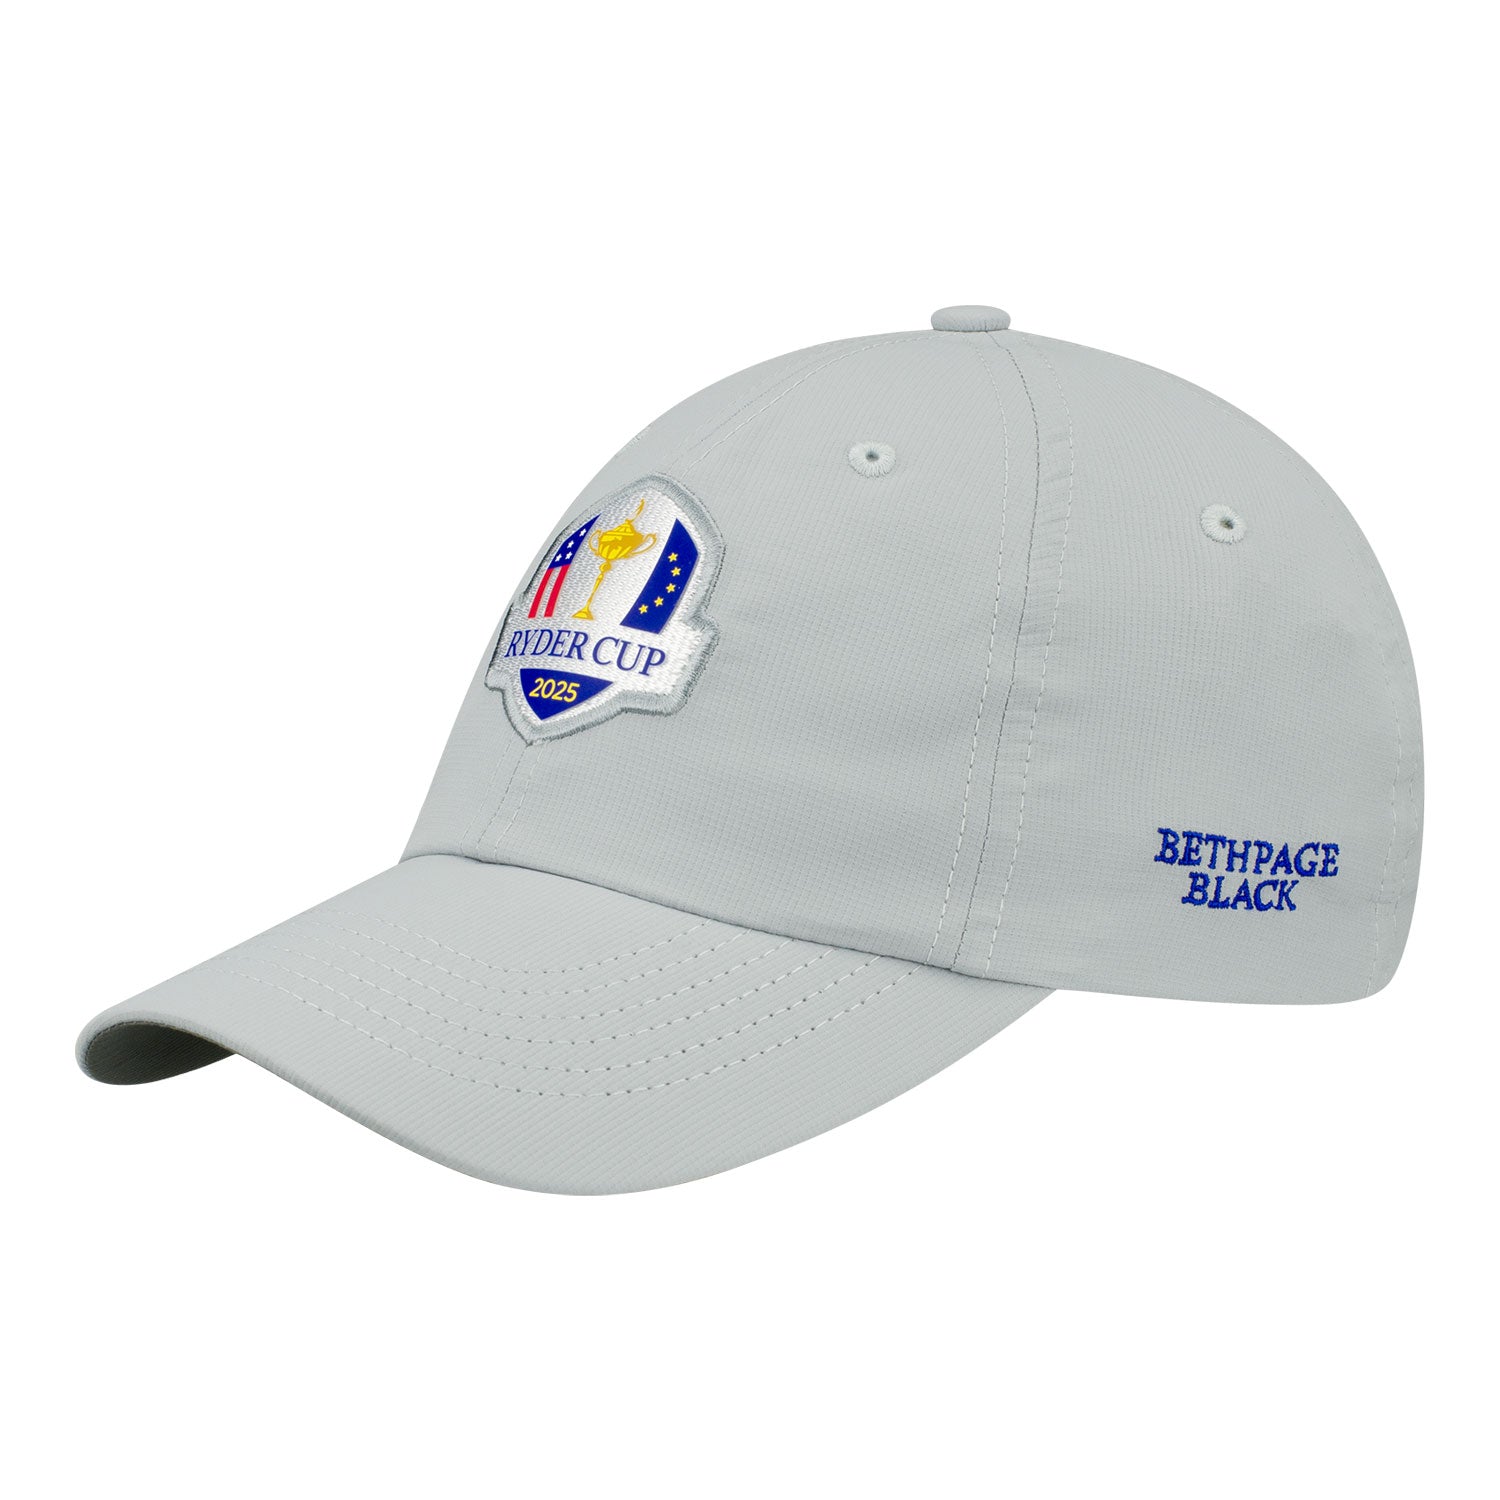 Imperial 2025 Ryder Cup Performance Hat in Fog - Angled Front Left View